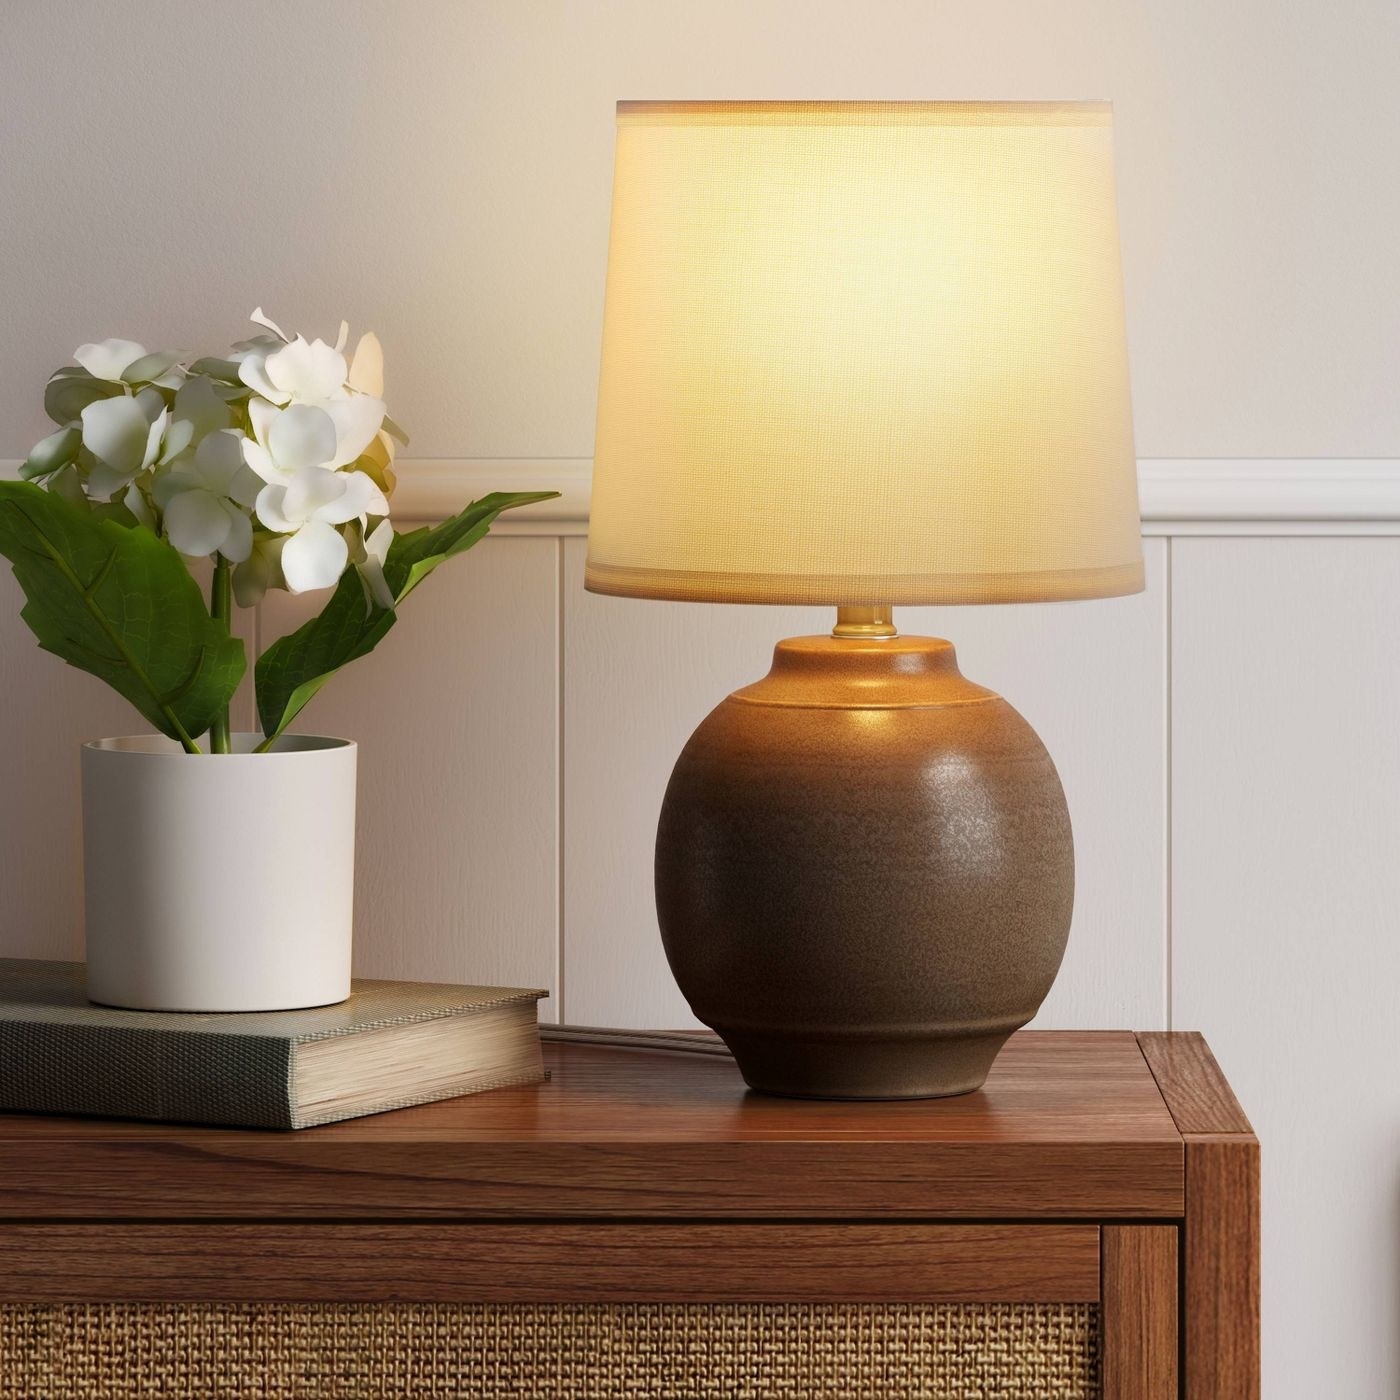 A brown lamp lit in a home